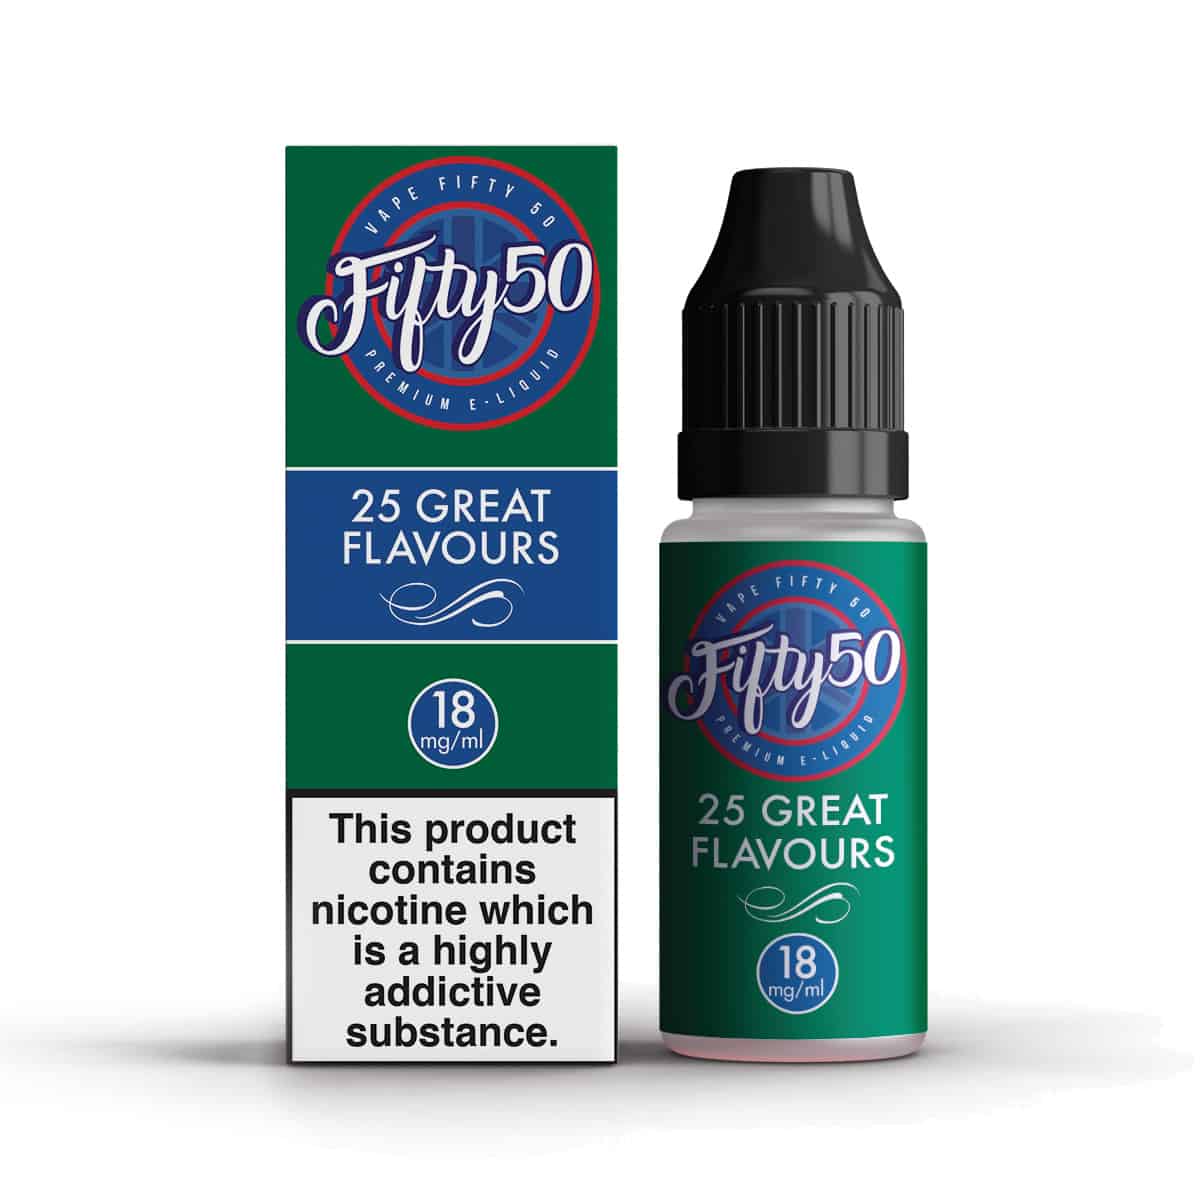 United kingdom UK First Eliquid Subscription Service Vape Made Simple offering Disposables, Freebase, Nic salts -  with a wide variety of disposables Lost Mary Crystal Bar Elf Disposables - 50 Fifty Cherry Menthol 18mg